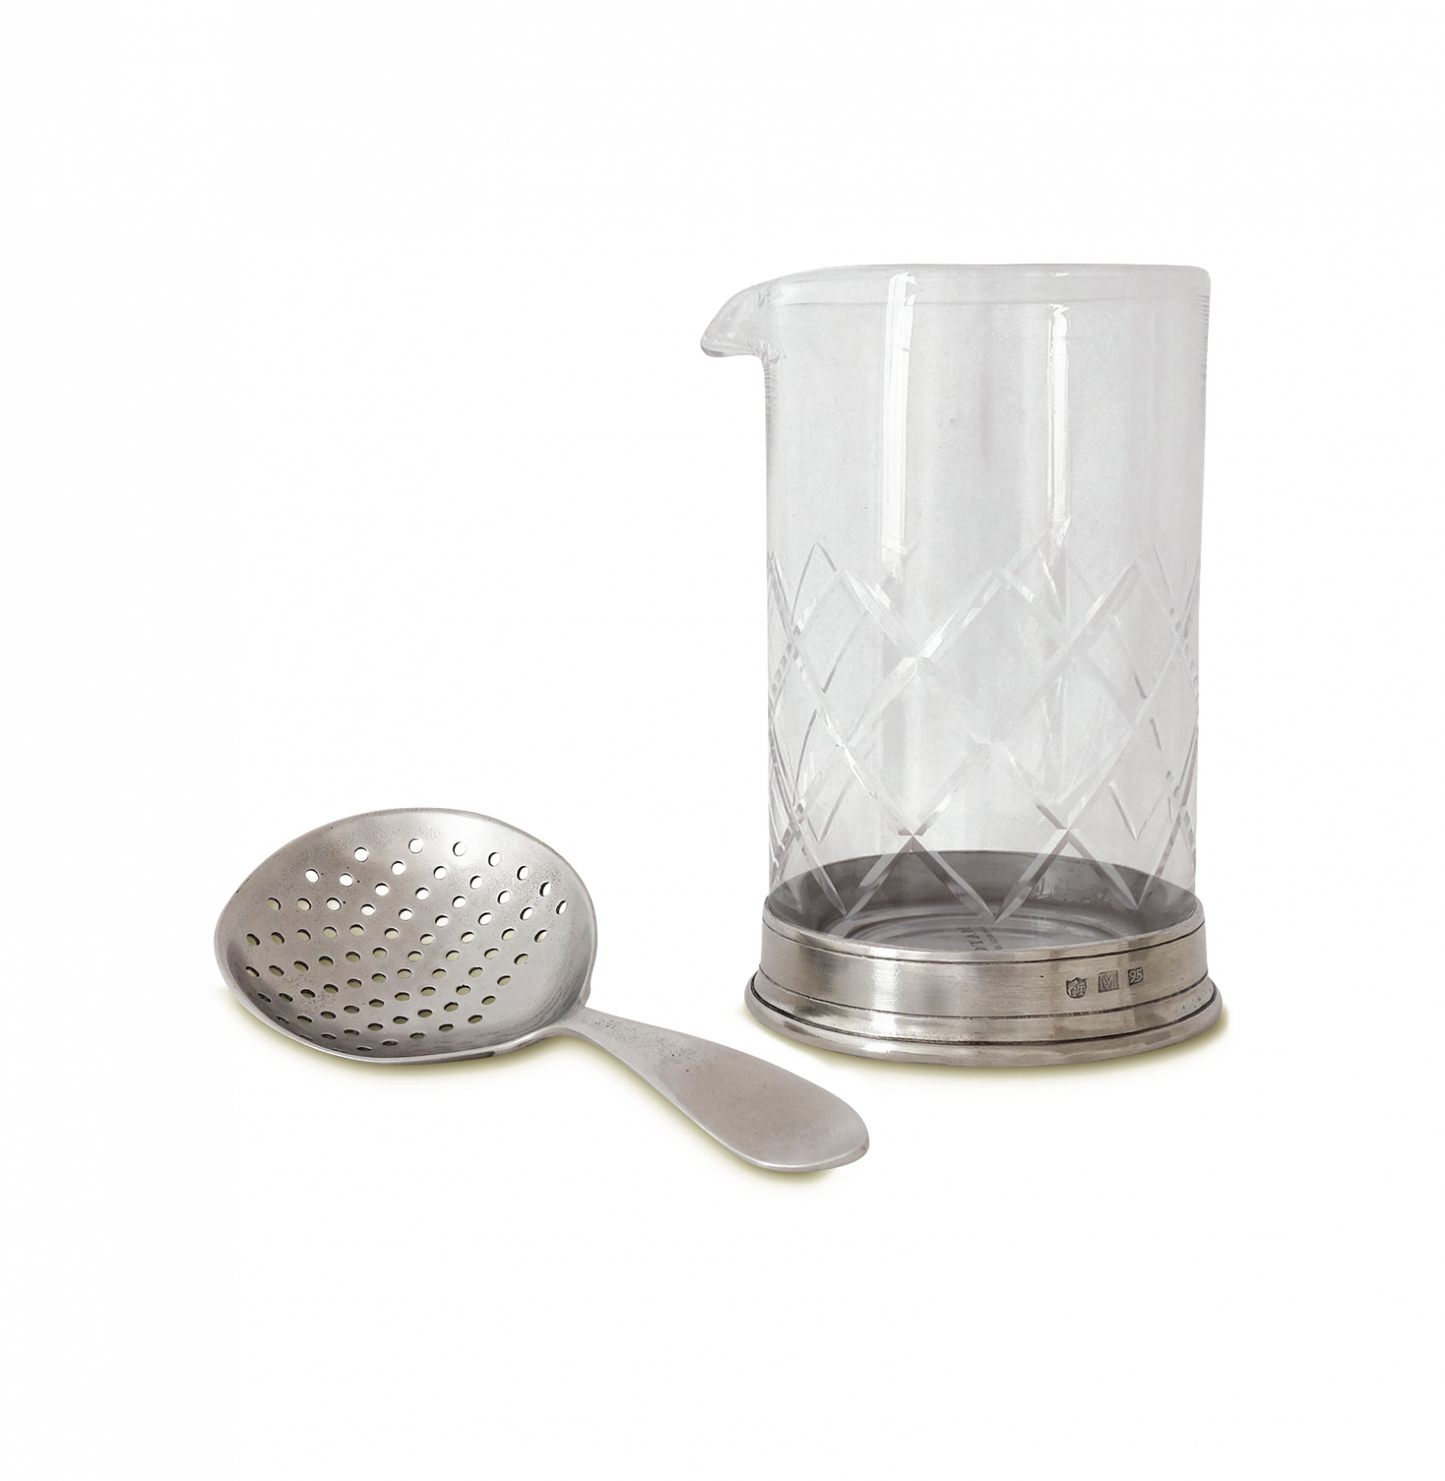 Match Pewter Mixing Glass & Cocktail Strainer Set